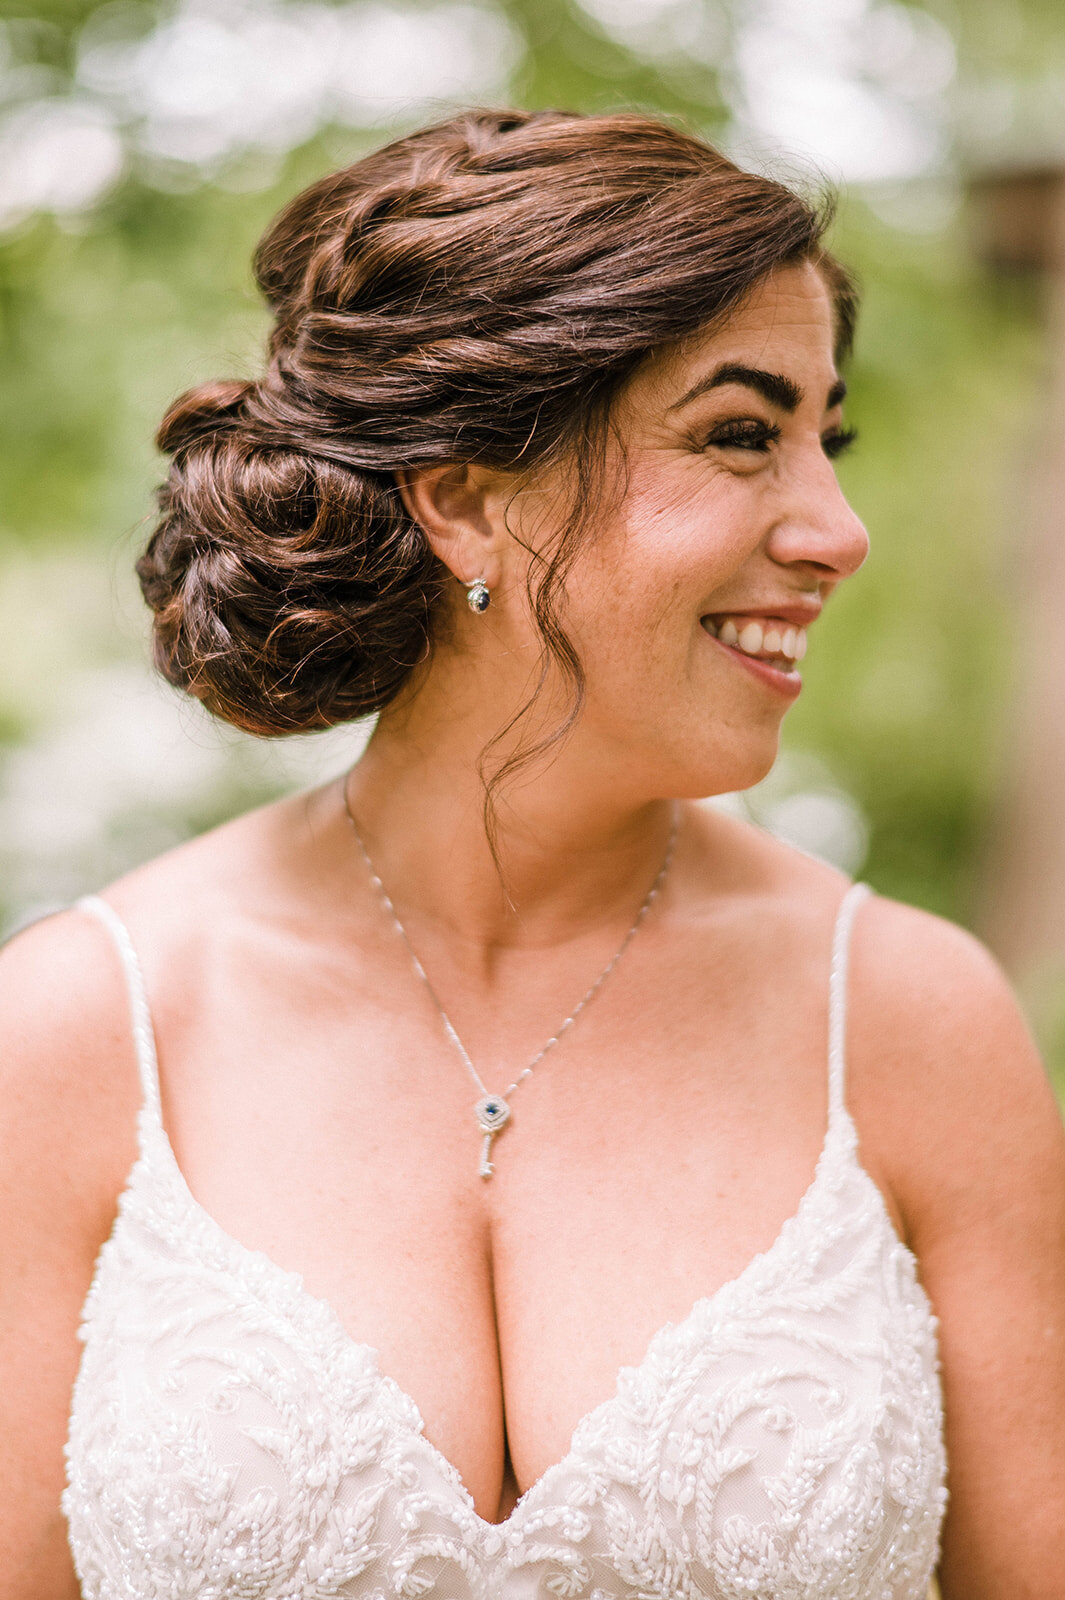 A bride with her hair in an updo wearing a white dress with a key necklace smiles at the Woodlands at Algonkian